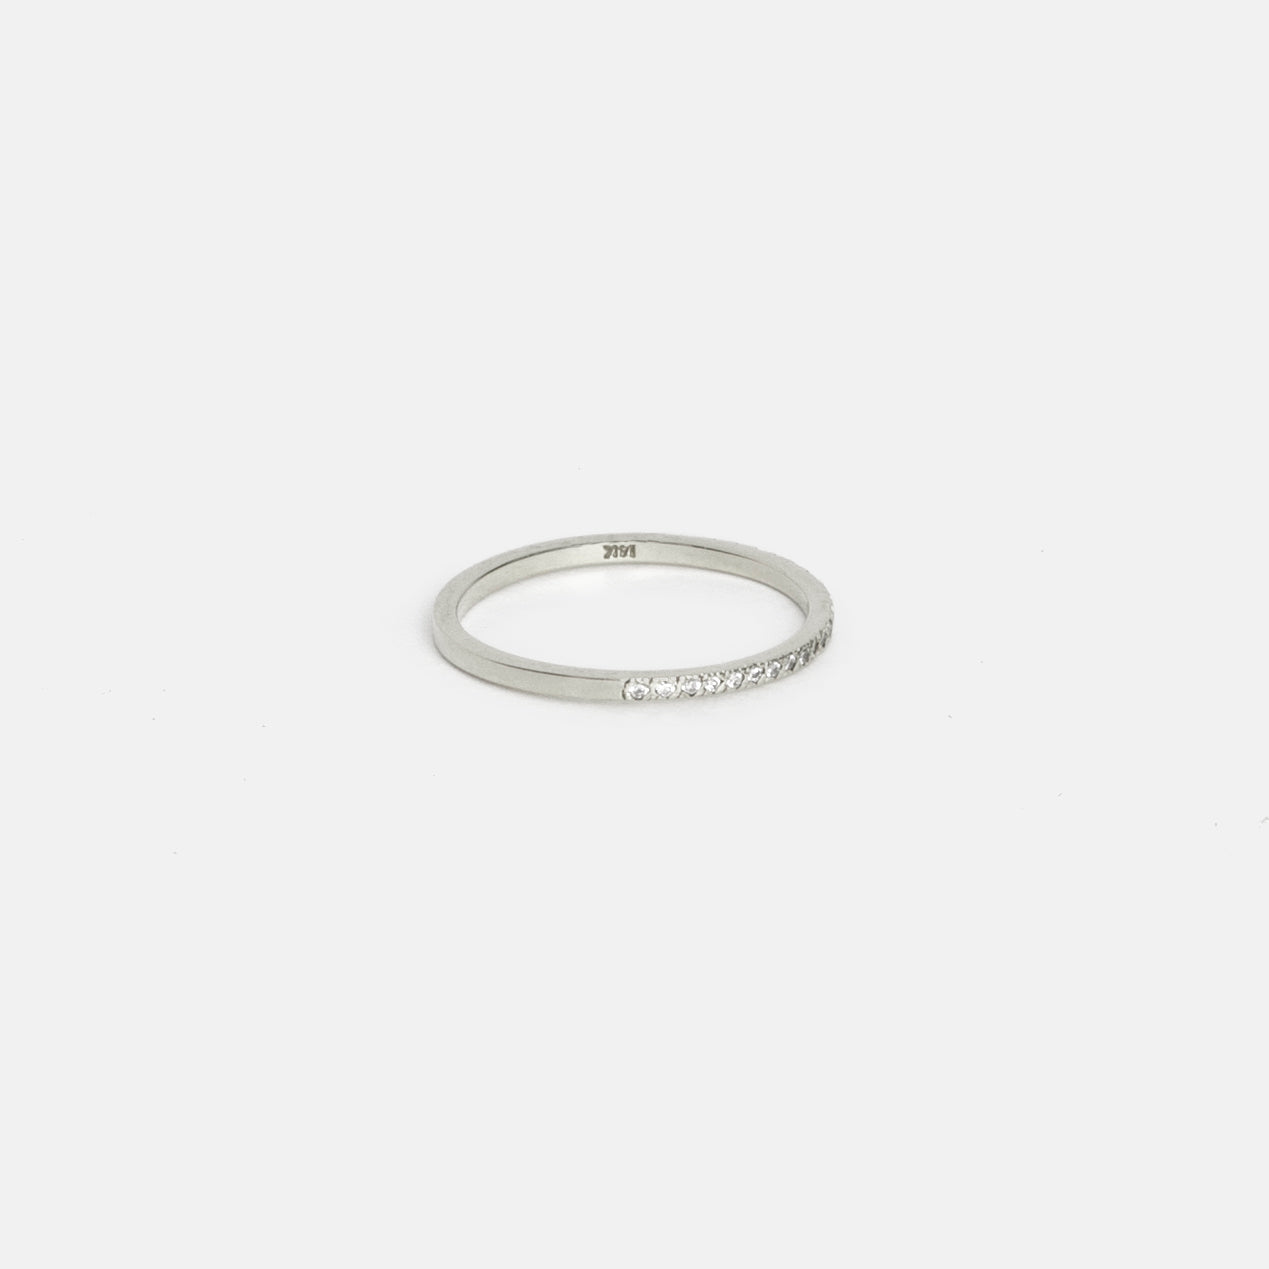 Eile Designer Ring in 14k White Gold set with White Diamonds By SHW Fine Jewelry NYC